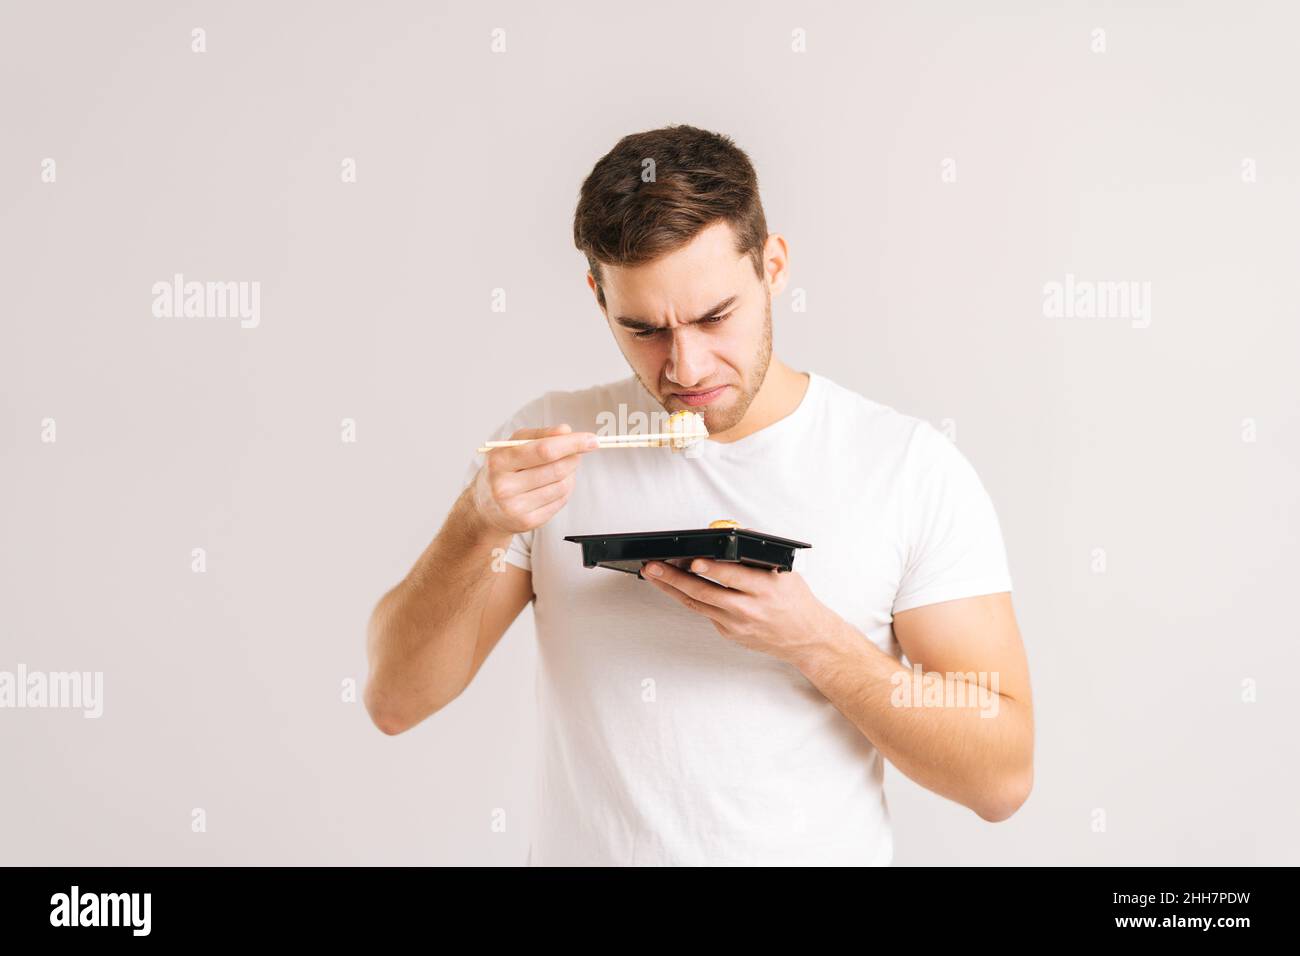 Portrait of disgusted young man holding sushi with chopsticks and sniffs with look of revulsion on face on white isolated background. Stock Photo